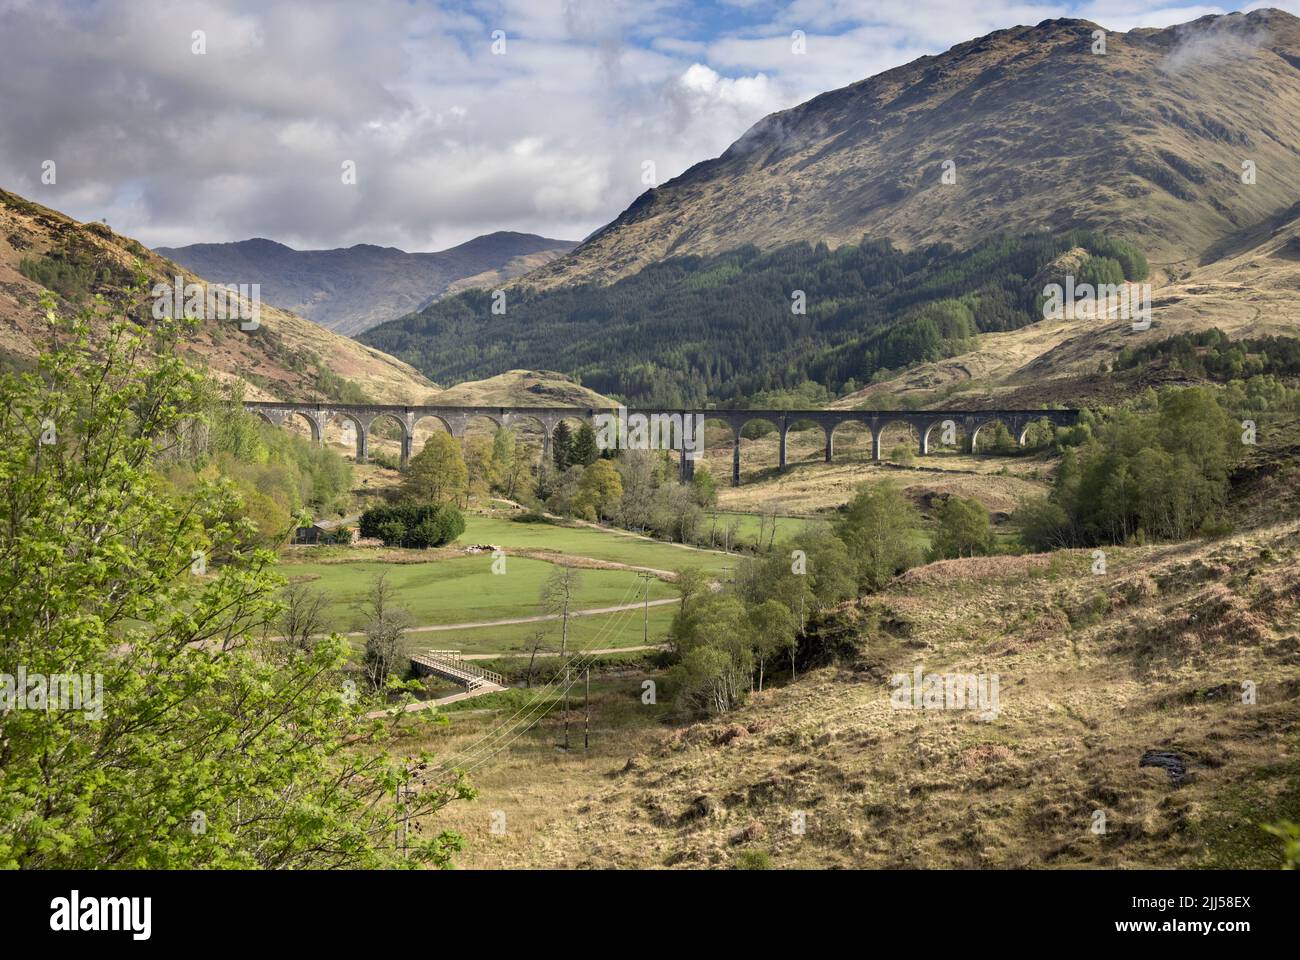 the glenfinnan viaduct made famous in harry potter films glenfinnan scotland Stock Photo